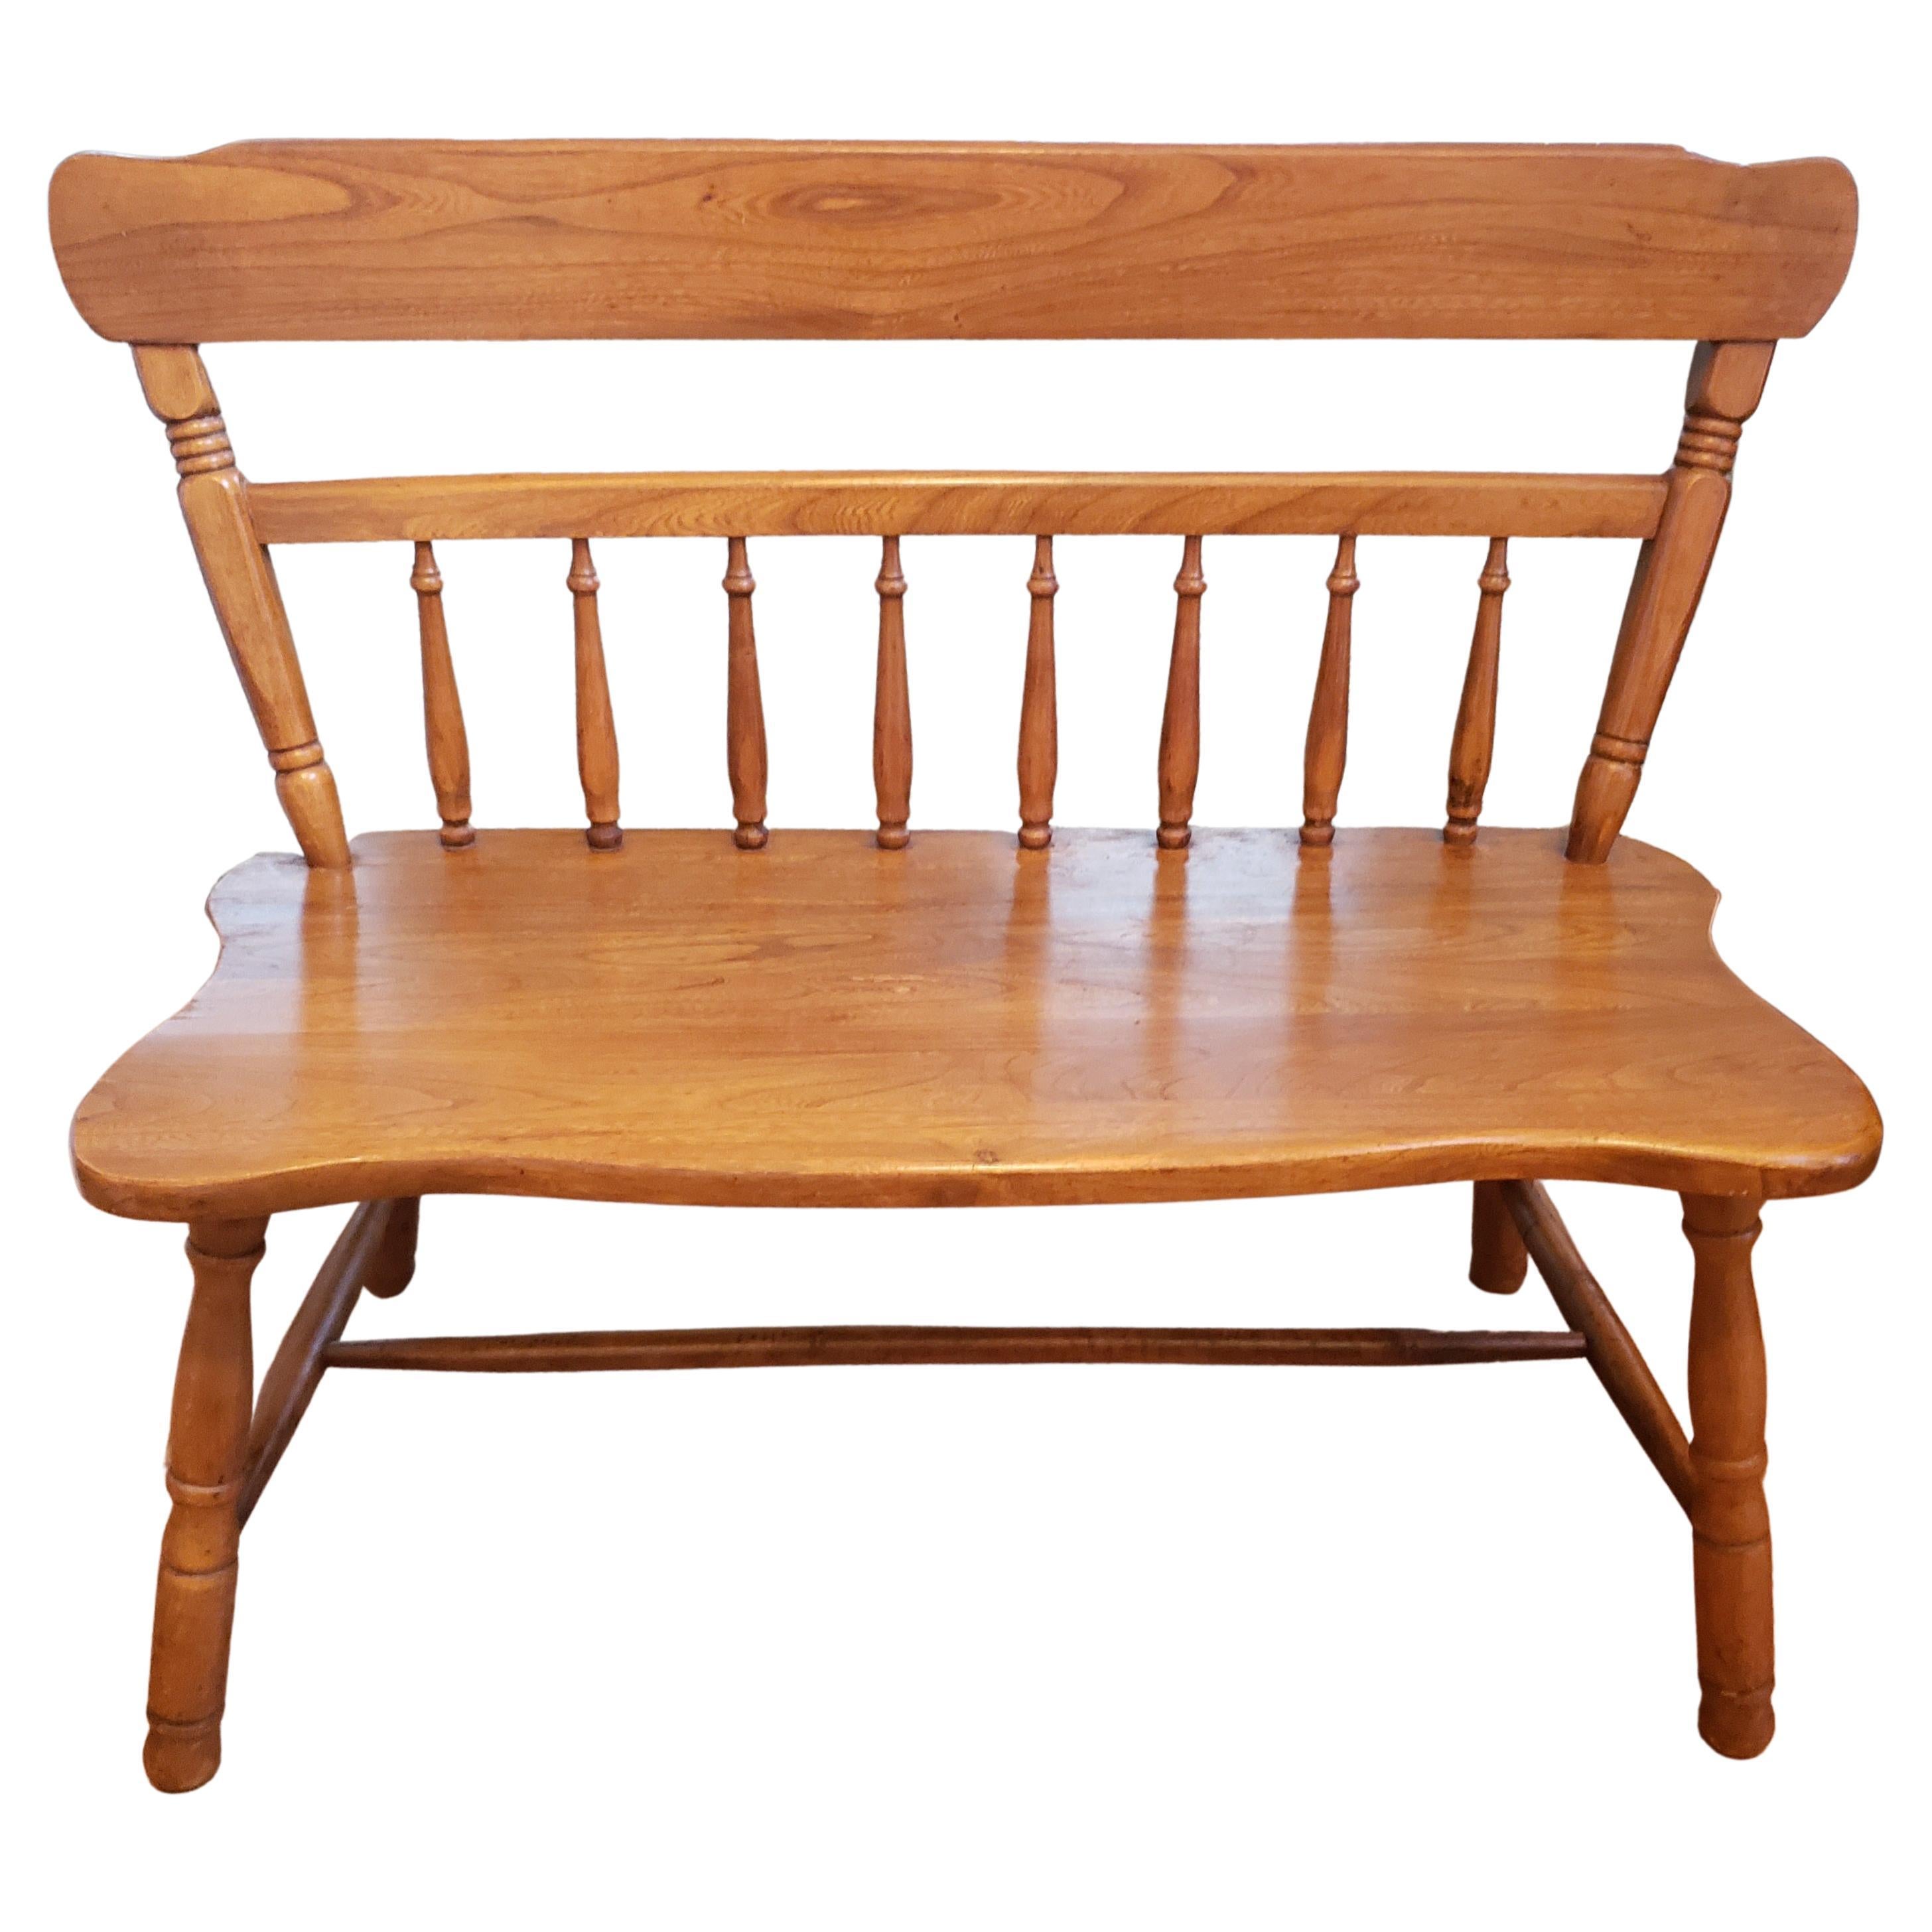 Solid Red Oak Farm House Style Two-Seat Bench Settee, Circa 1970s For Sale